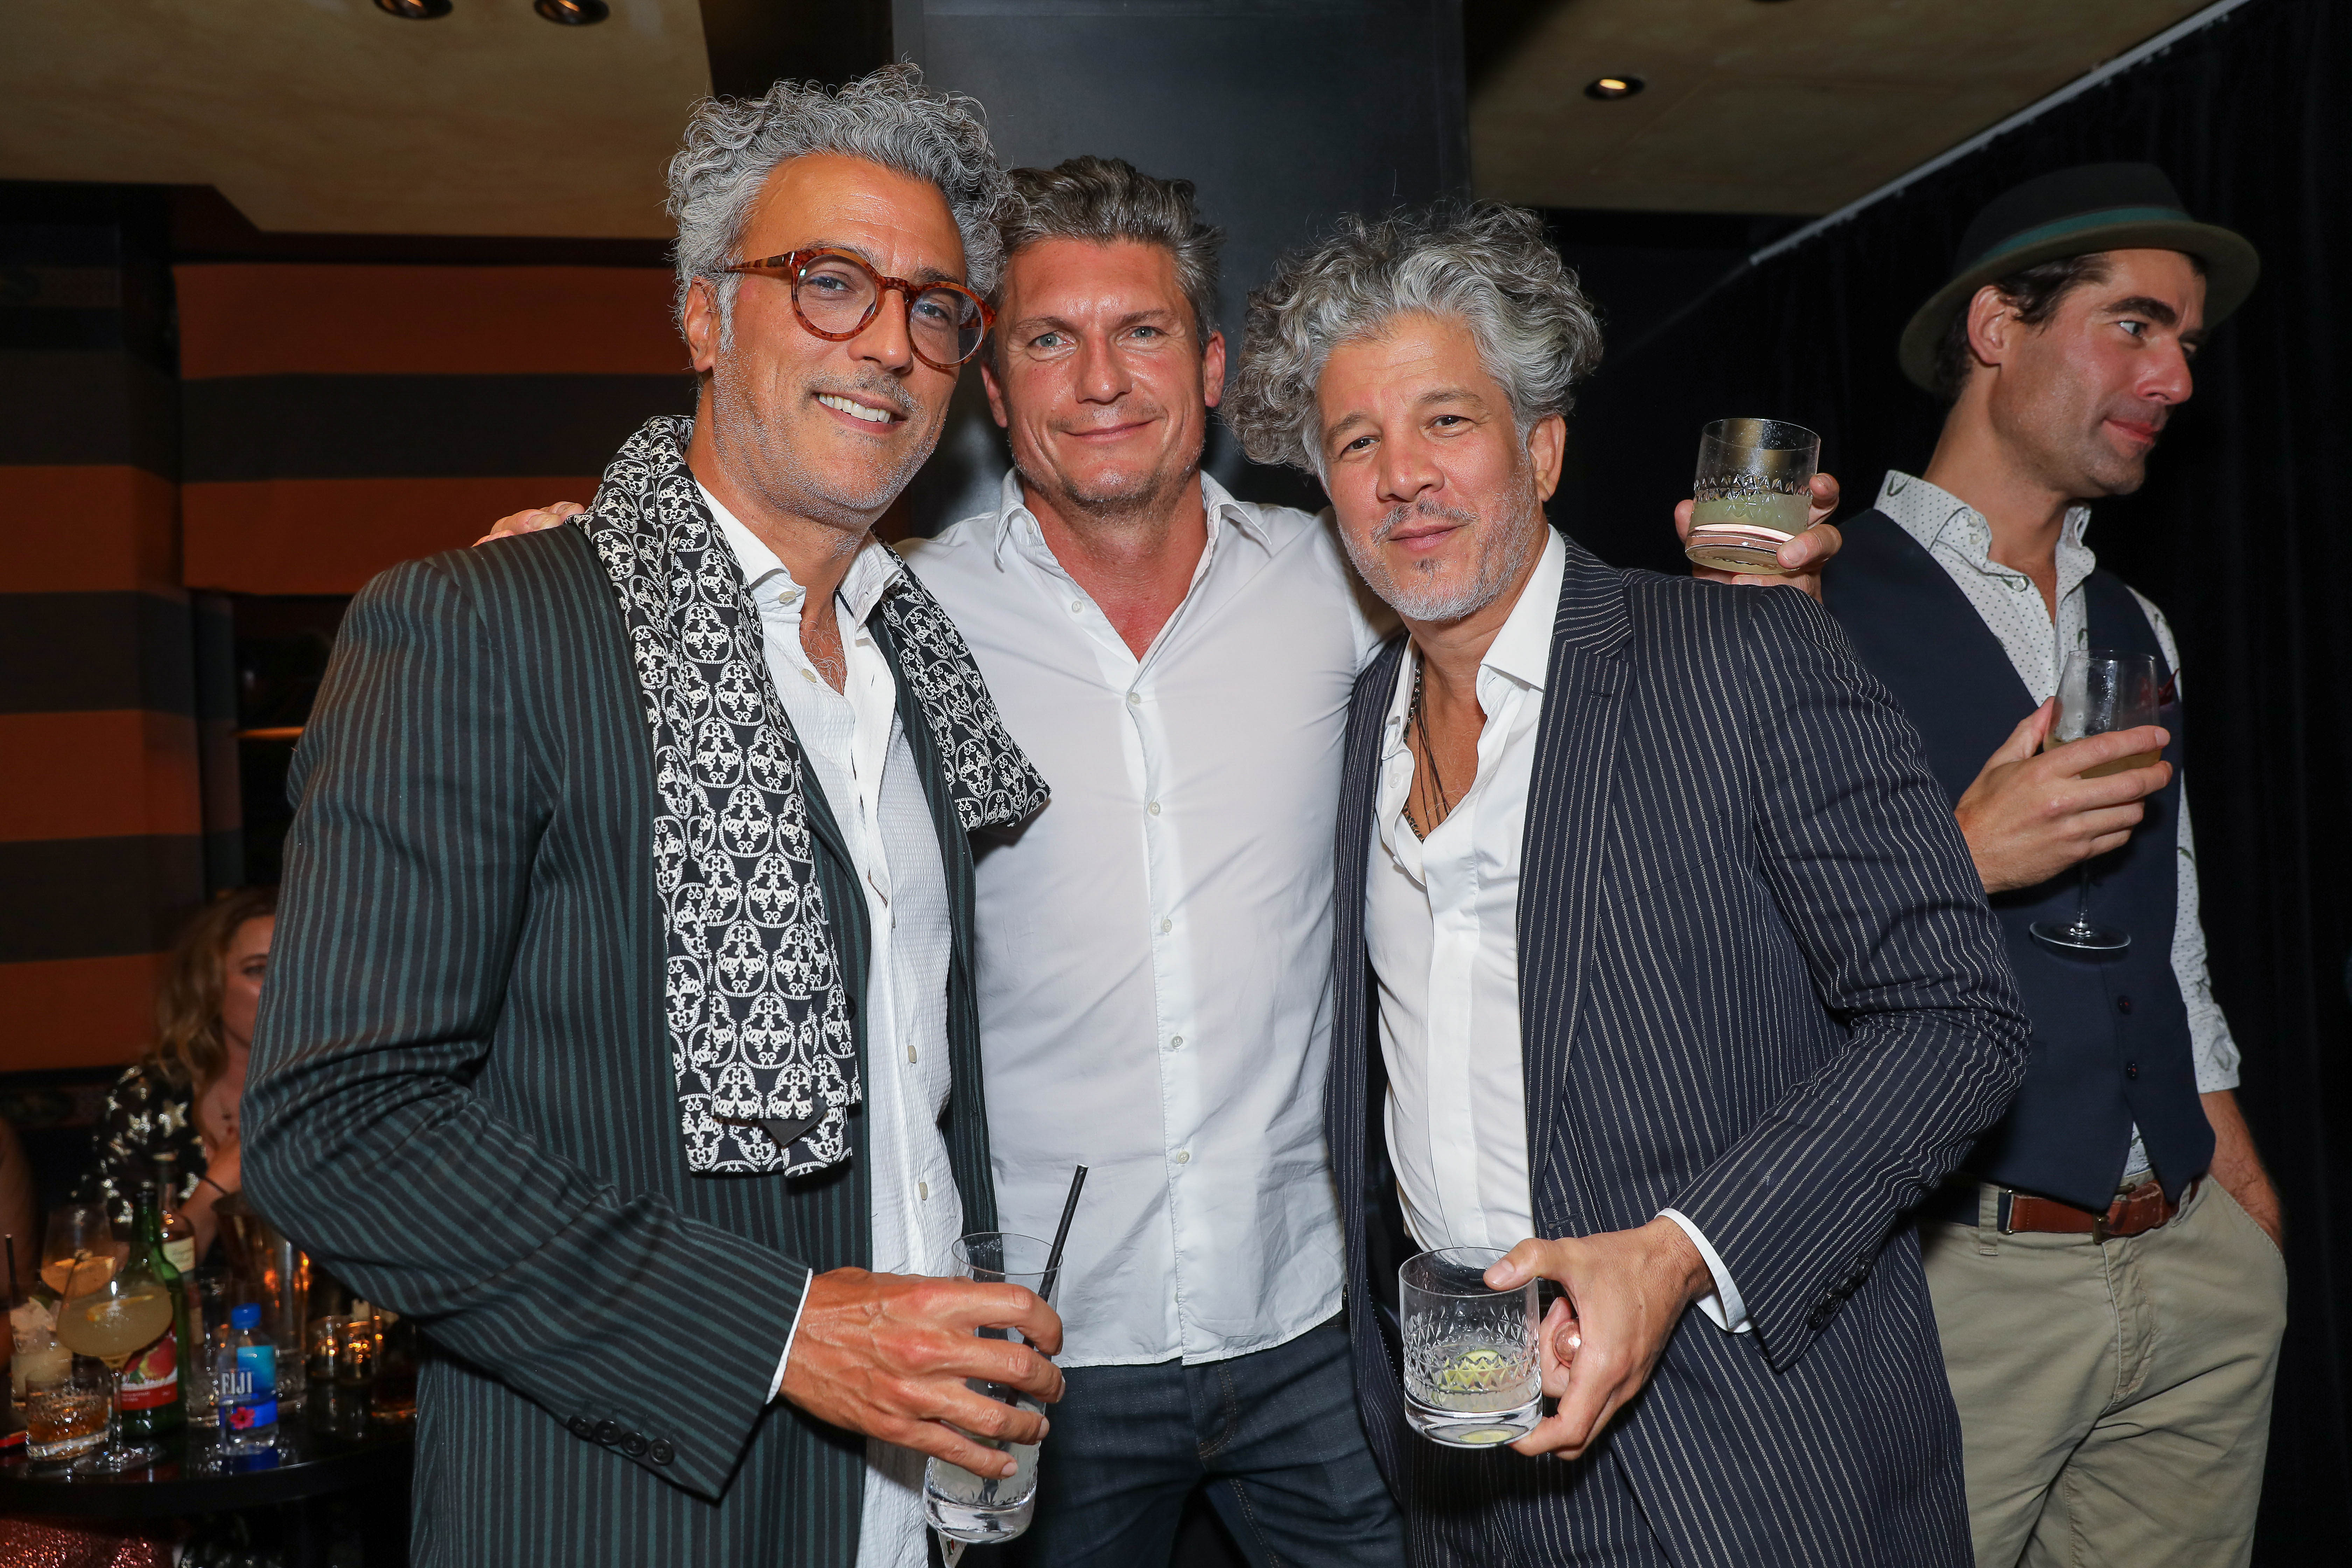 Glen Atchison, Fabrizio Zapanetta and Lucho Brieva attend the Temperley London SS19 after party at Bungalow Blakes on September 15, 2018 in London, England. | Source: Getty Images